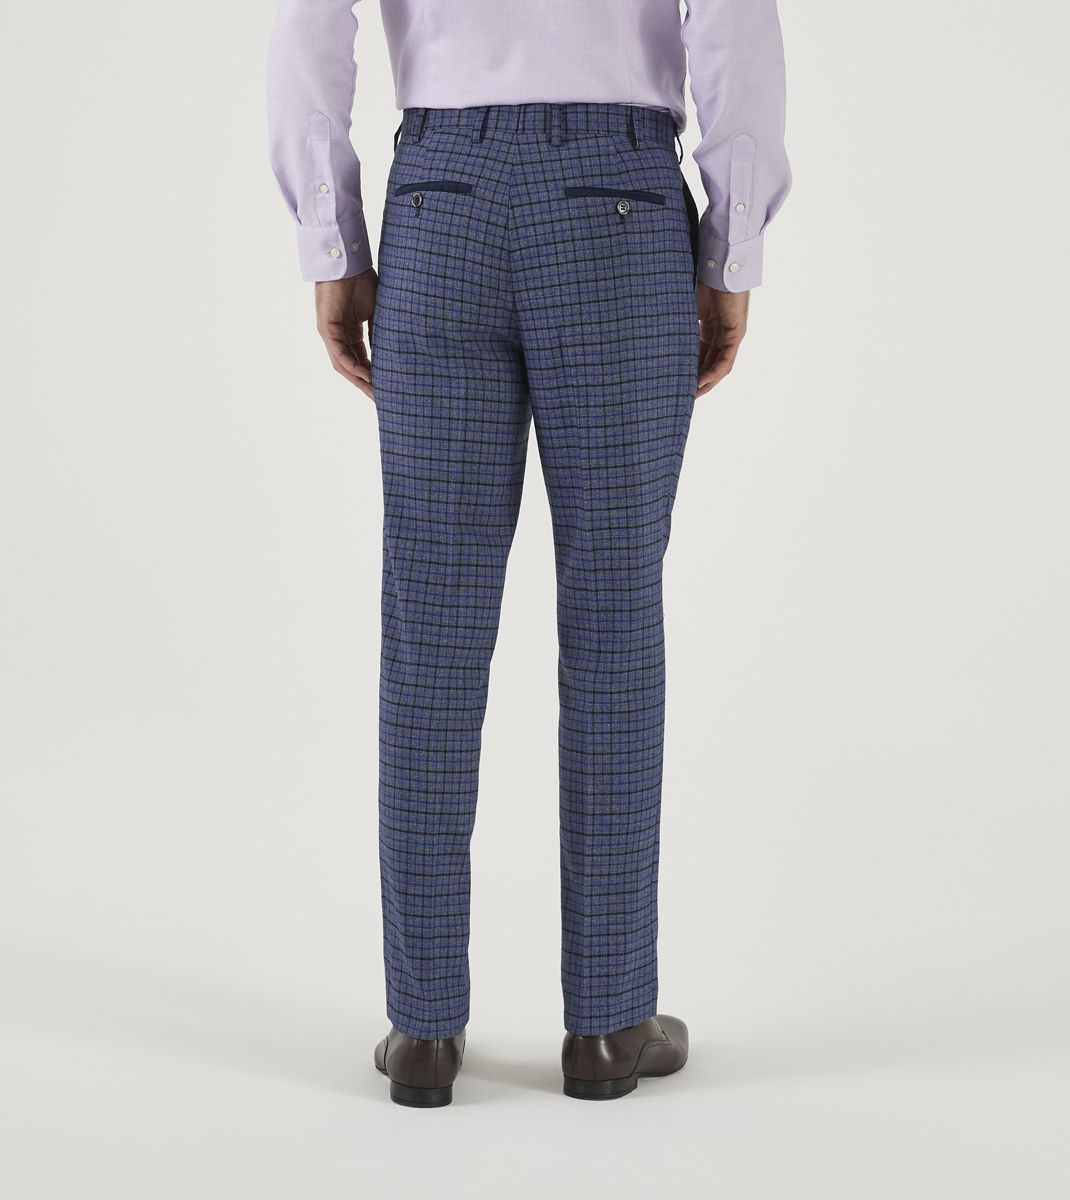 Skopes Enzo Blue & Navy Check Tailored Trousers